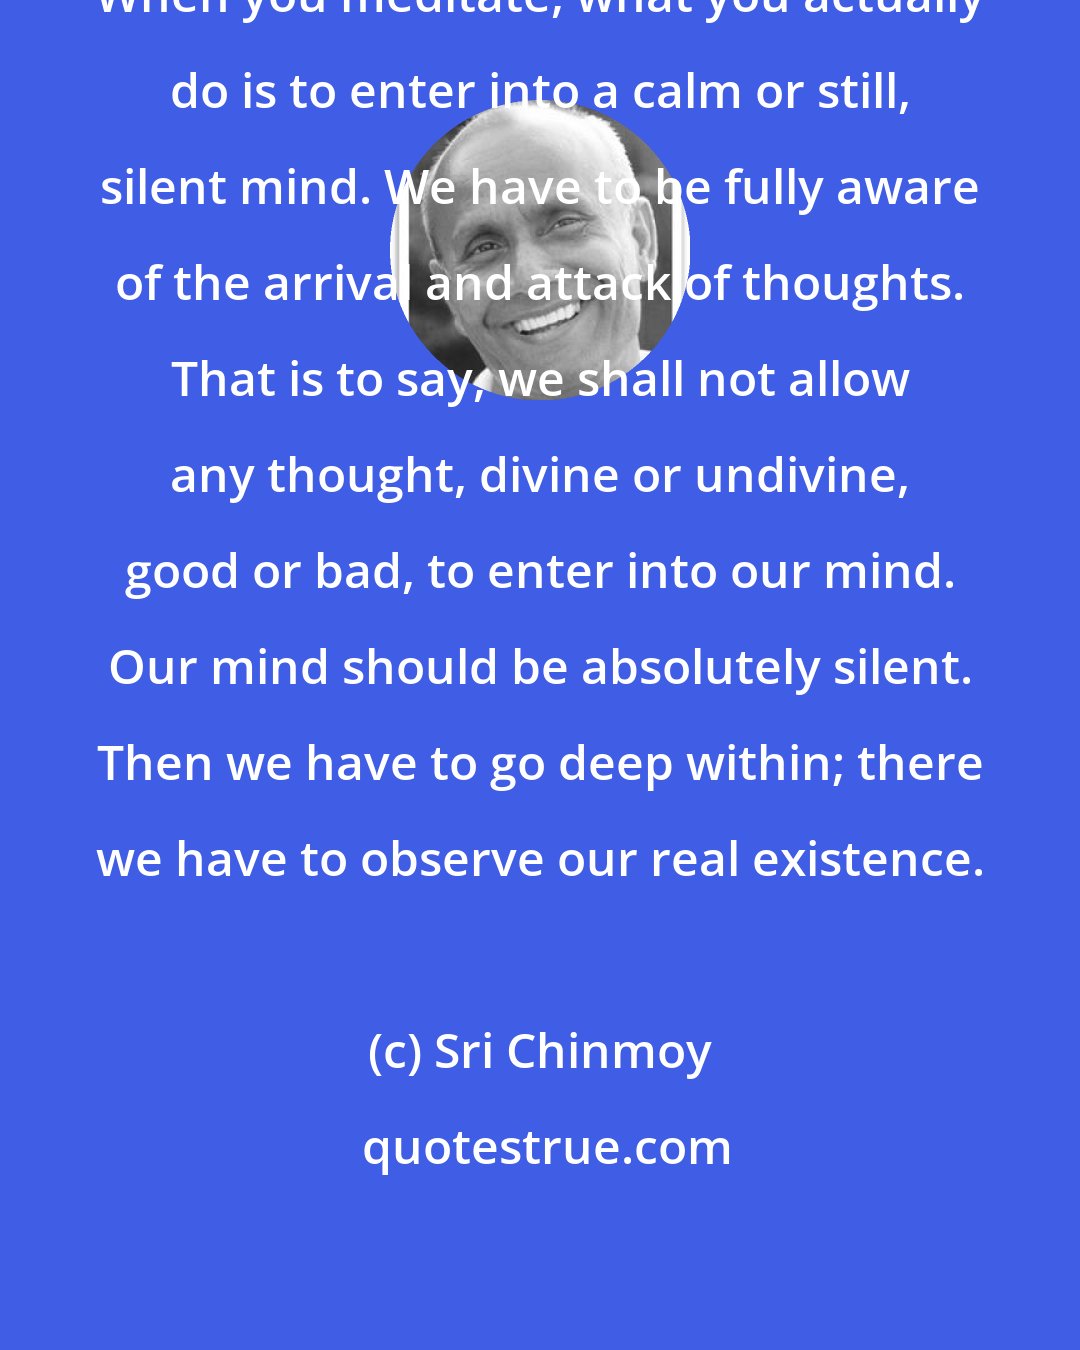 Sri Chinmoy: When you meditate, what you actually do is to enter into a calm or still, silent mind. We have to be fully aware of the arrival and attack of thoughts. That is to say, we shall not allow any thought, divine or undivine, good or bad, to enter into our mind. Our mind should be absolutely silent. Then we have to go deep within; there we have to observe our real existence.